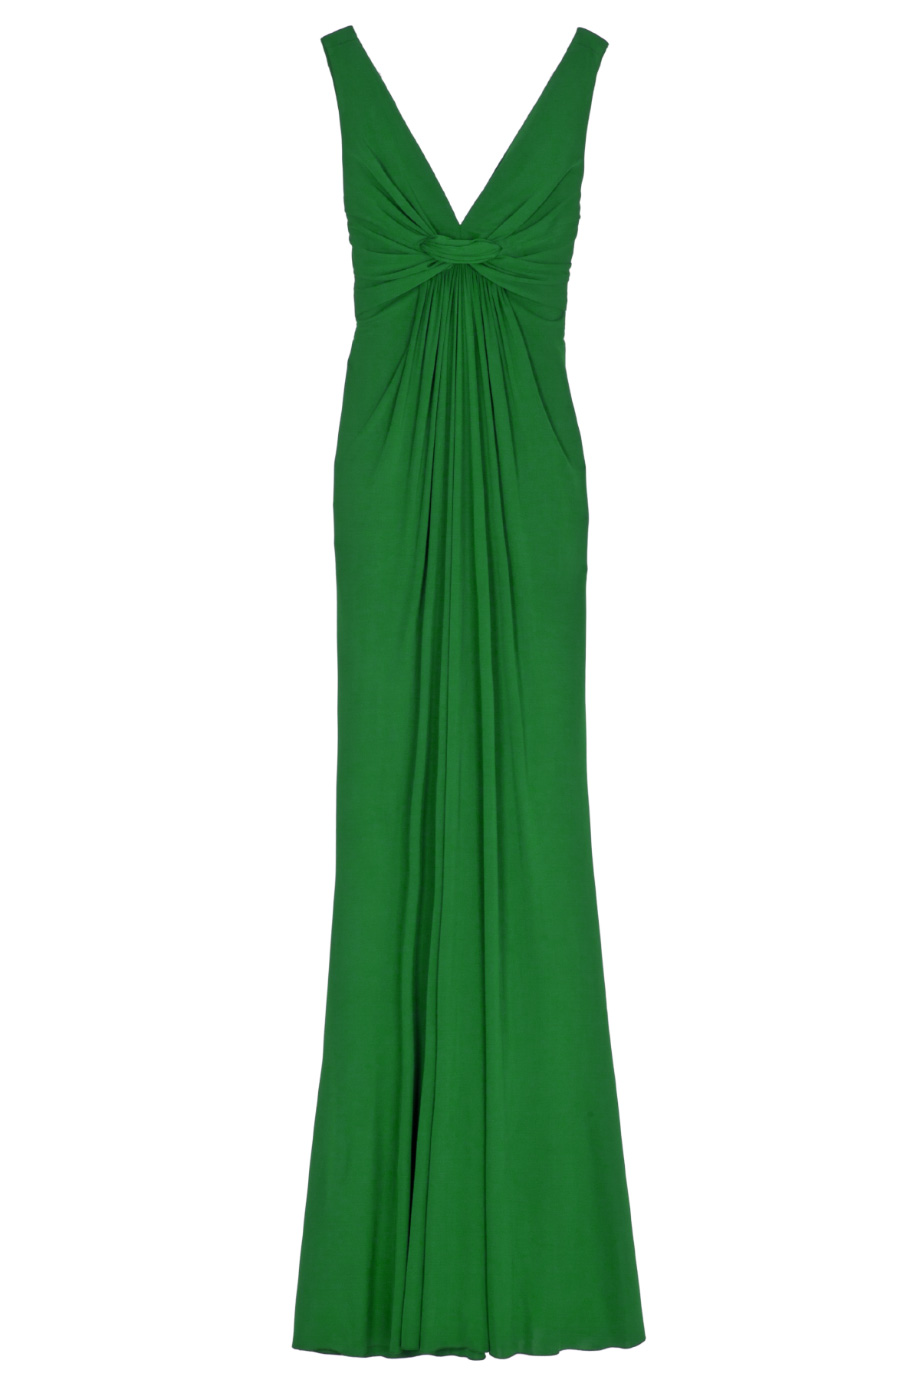 Elie saab Long Jers Drs V Back Knot Fnt in Green | Lyst